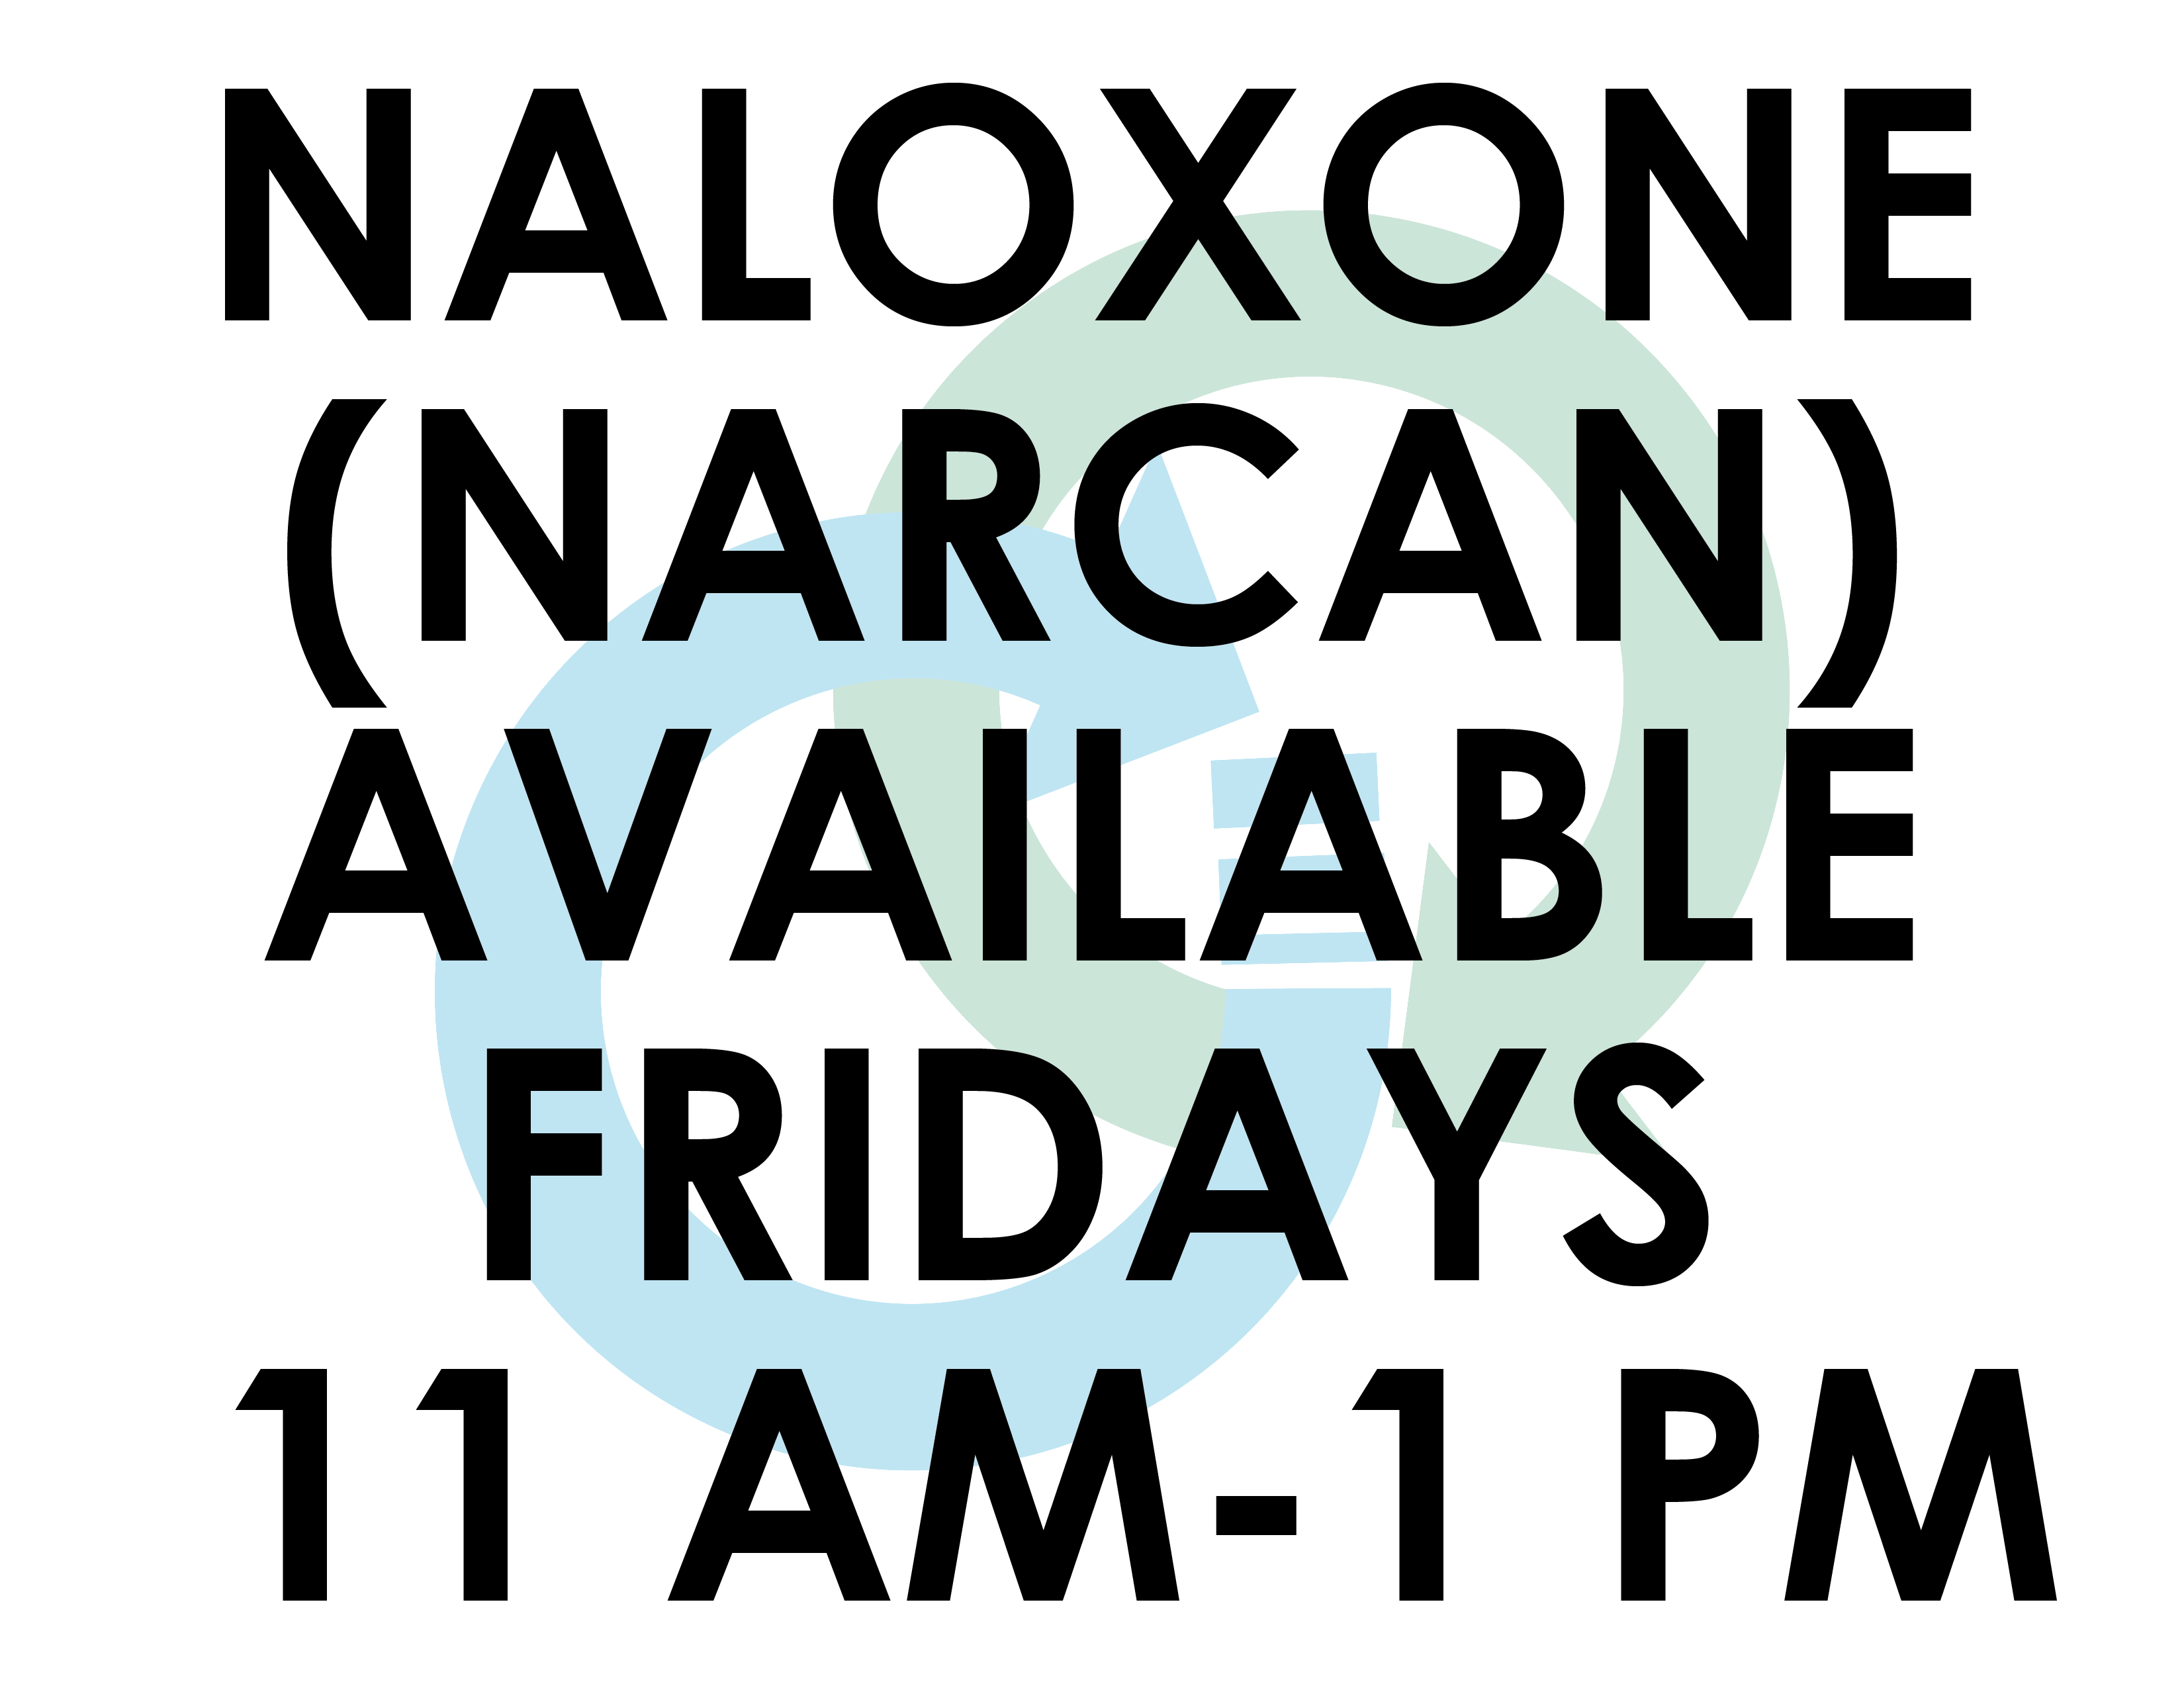 Free Narcan kits available 11 a.m.-1 p.m. Fridays